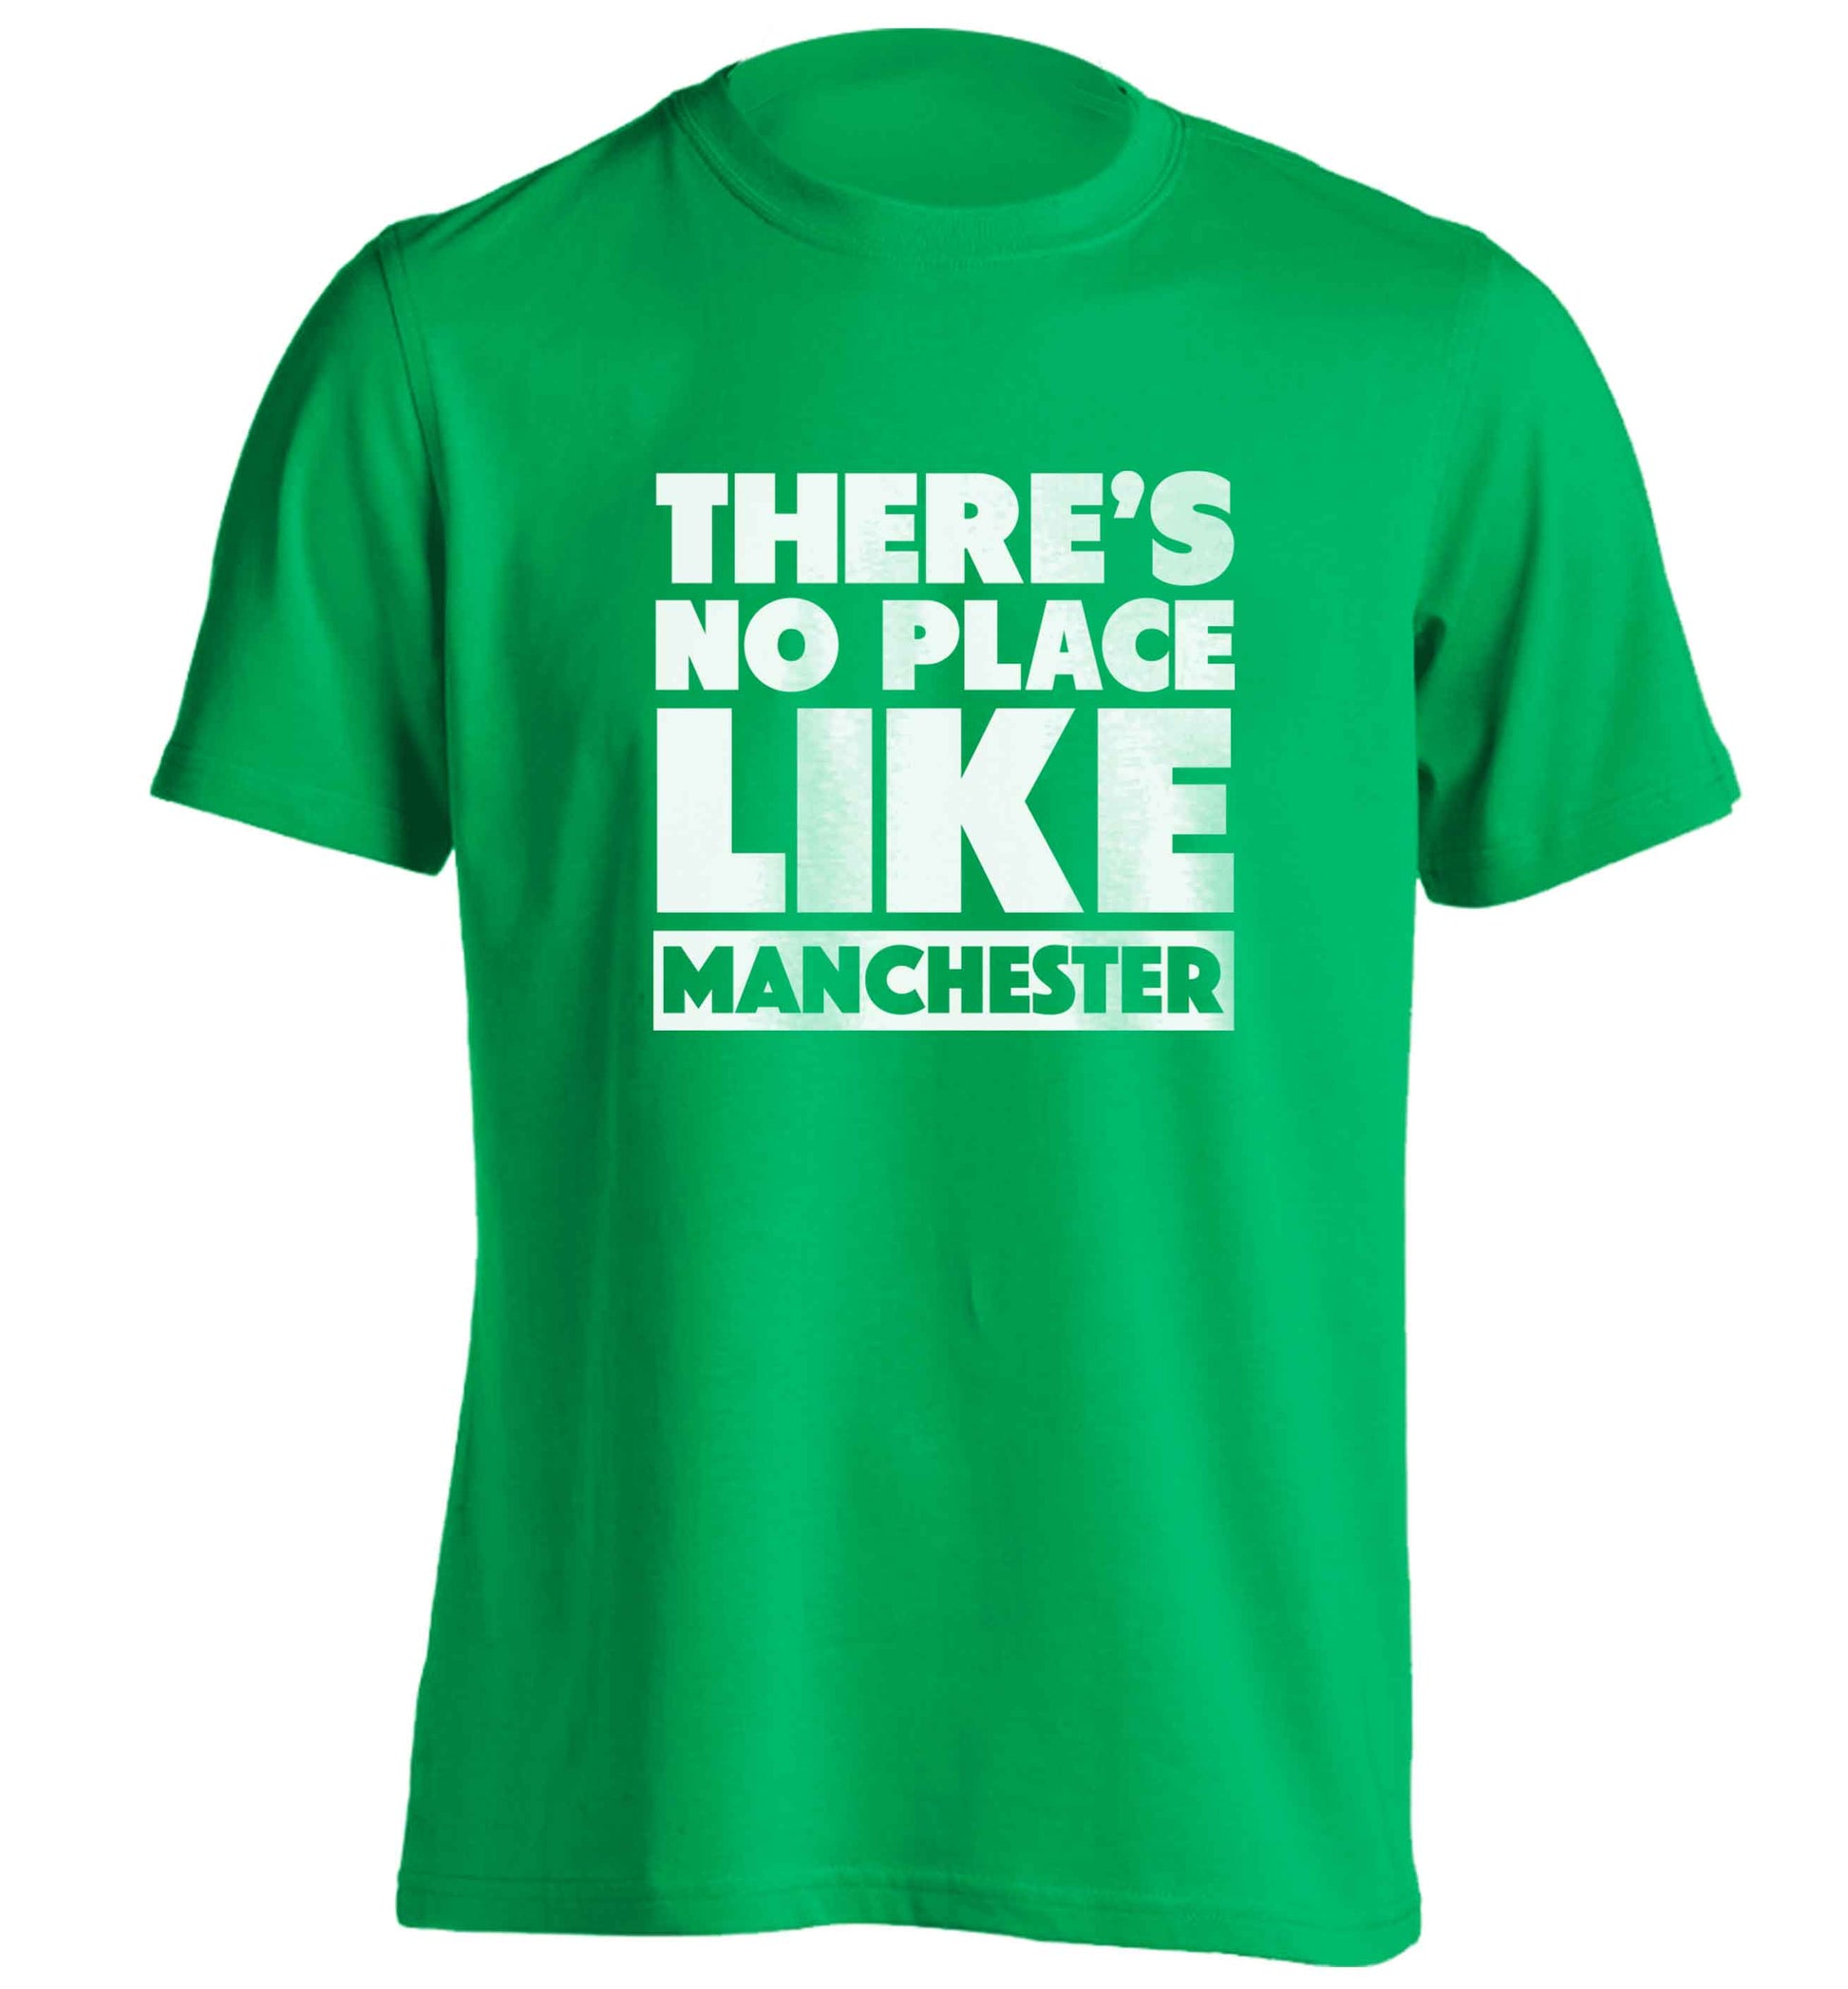 There's no place like Manchester adults unisex green Tshirt 2XL